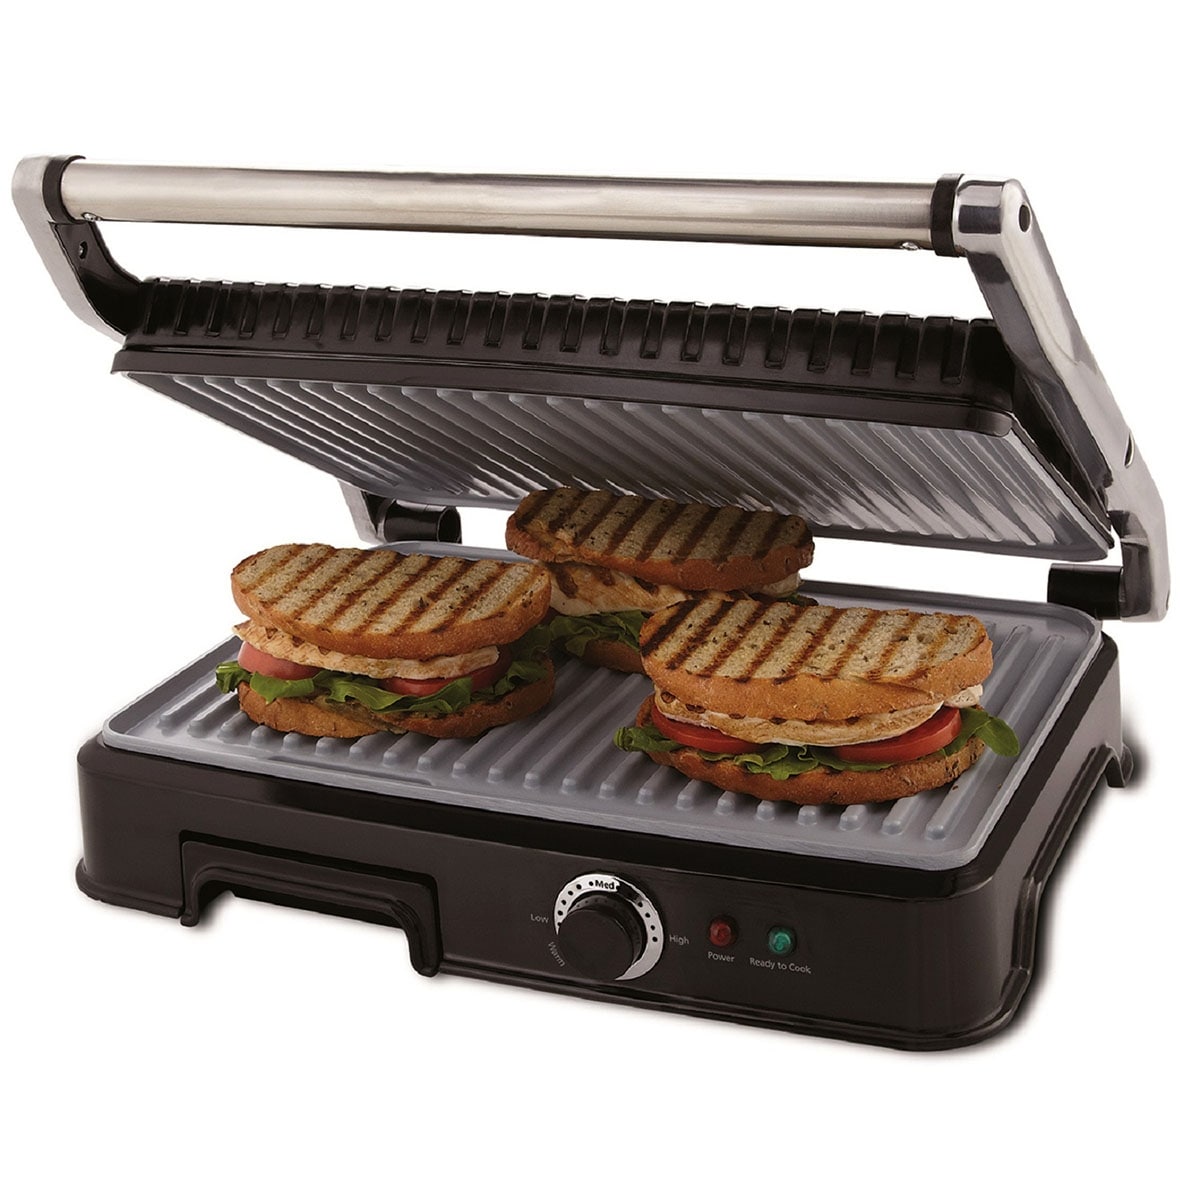 Best Buy: Oster DuraCeramic 2-in-1 Electric Panini Maker/Grill Charcoal  CKSTPM20W-ECO